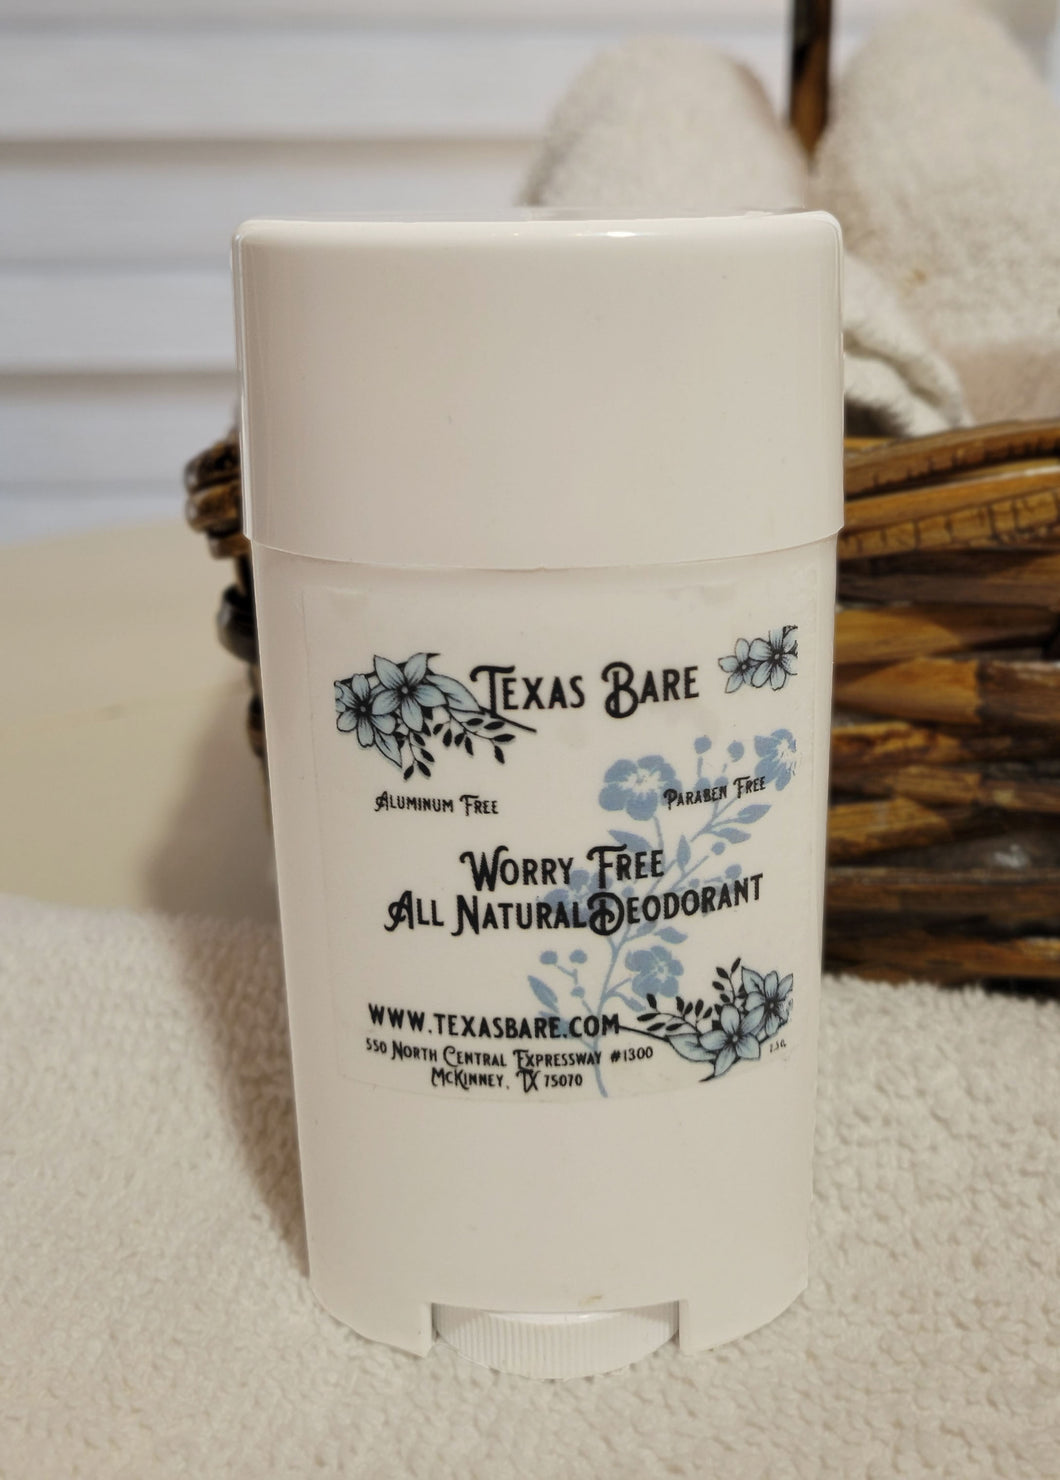 Worry-Free All Natural Deodorant